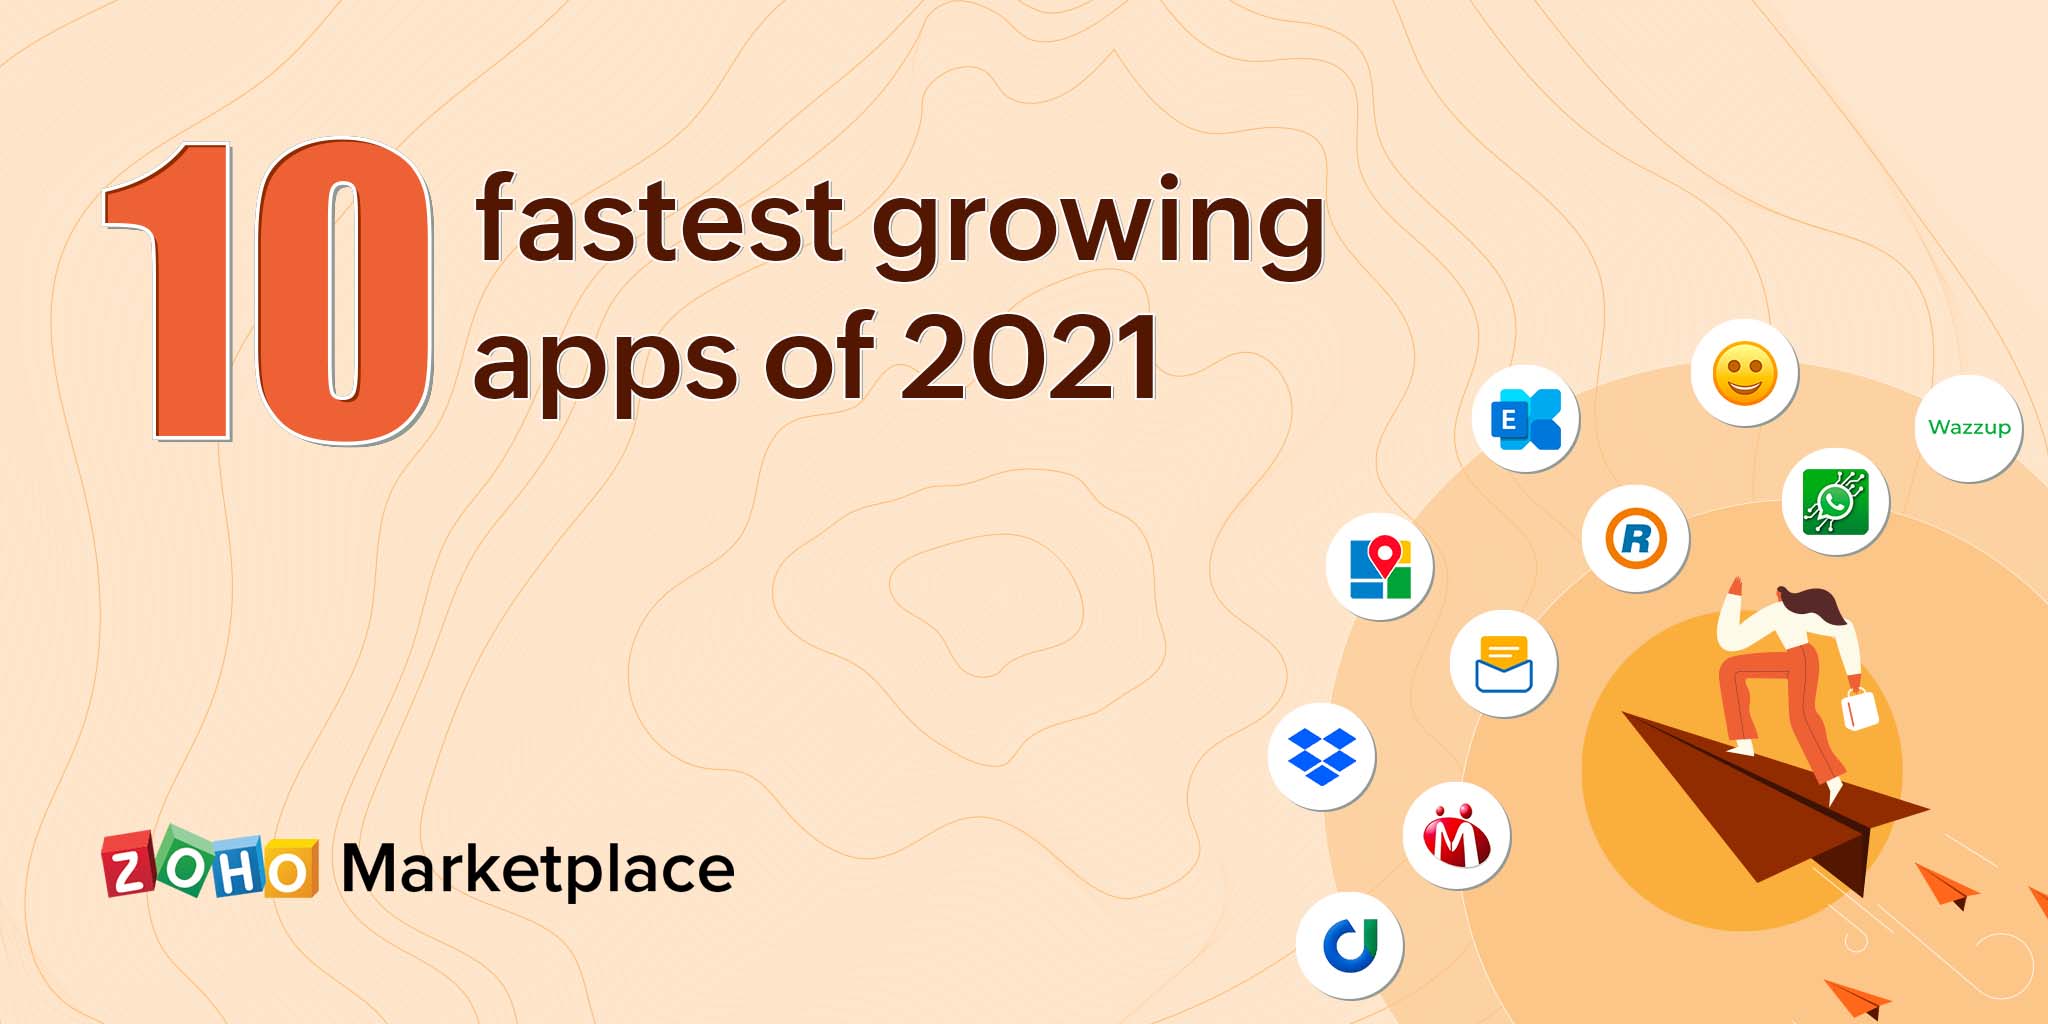 10 fastest growing apps of 2021